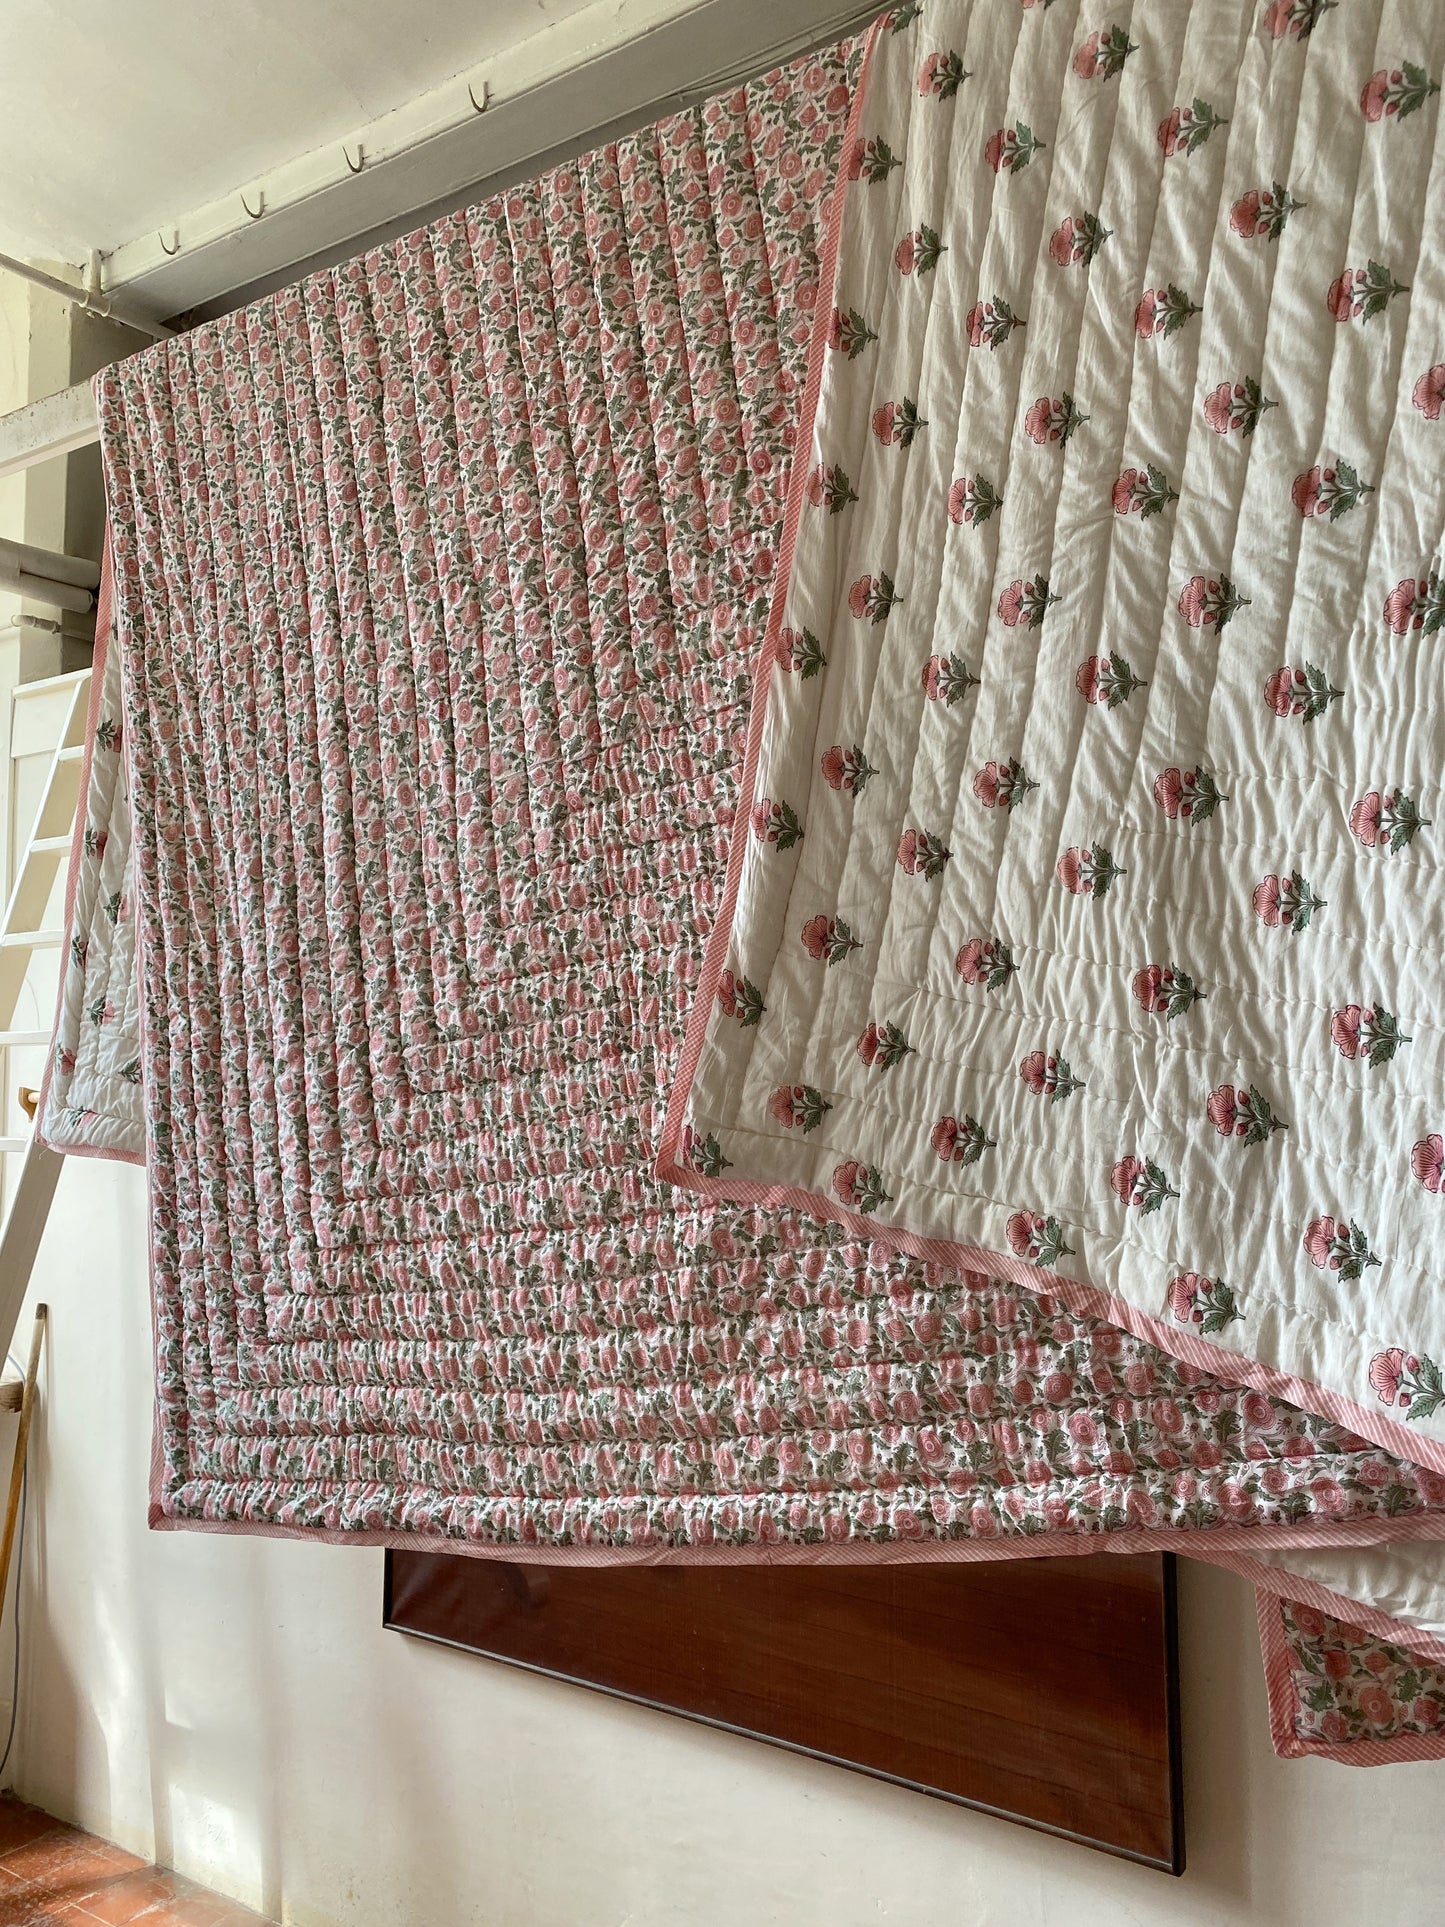 Pink Butti Bed Floral Quilt